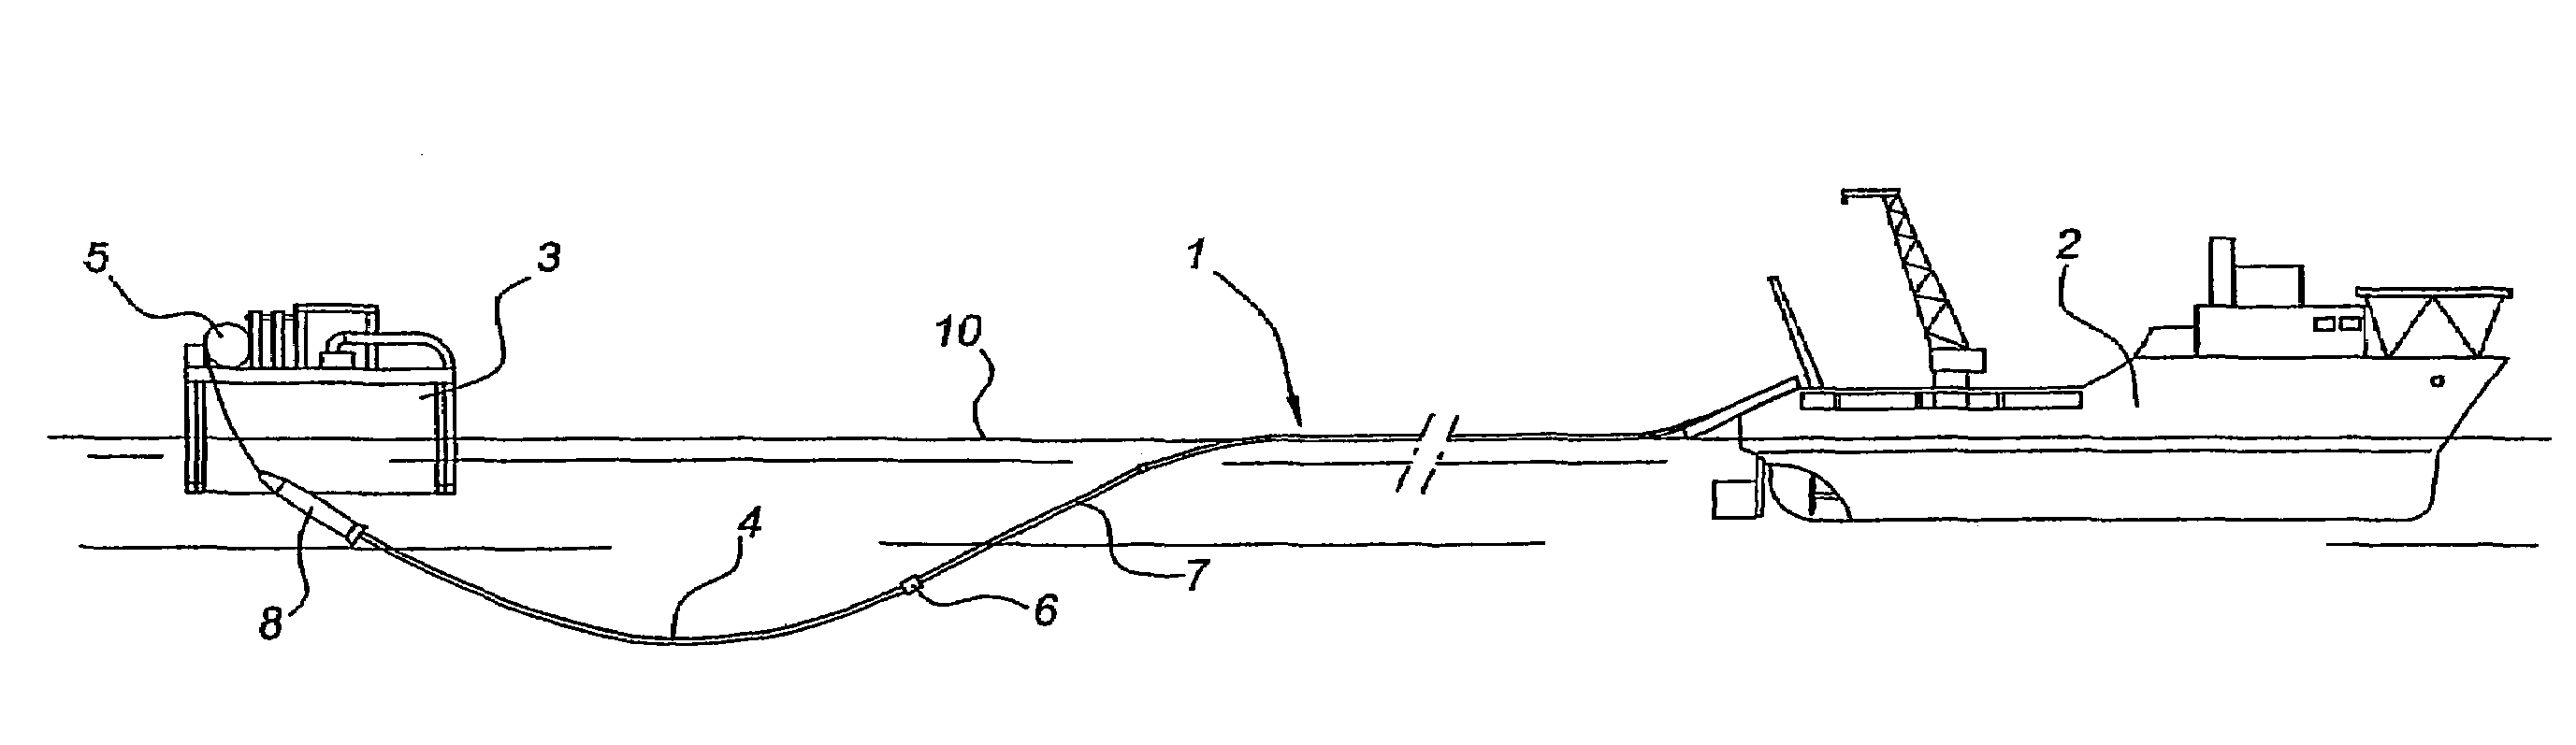 Method of supplying oil from a floating production structure to an offloading buoy via a thermally insulated flexible transfer duct